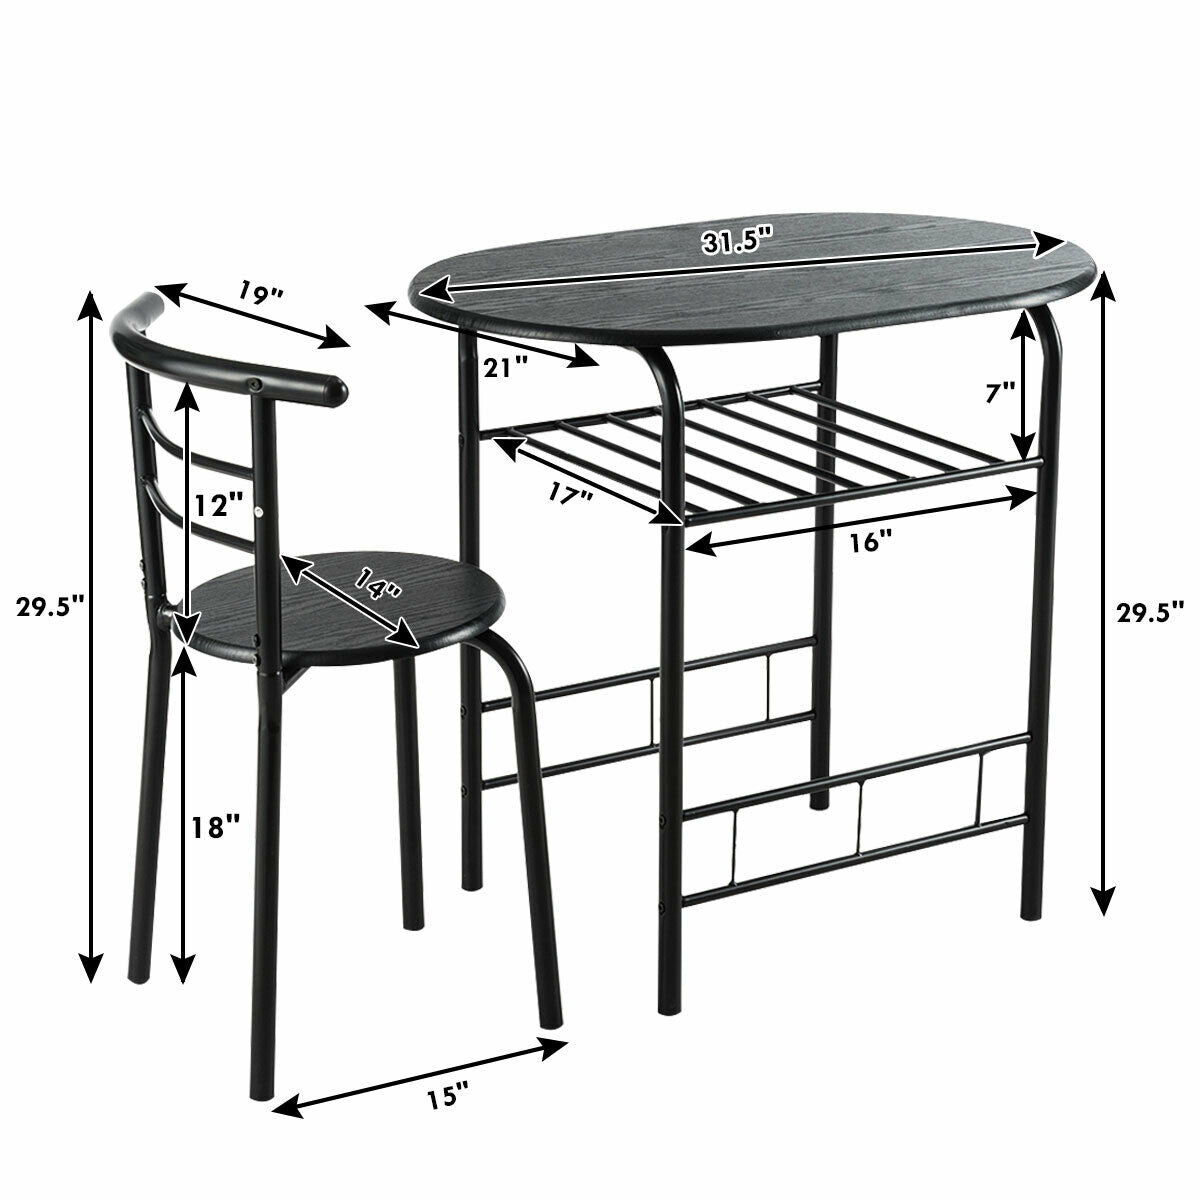 Easy Assembly: This elegant wooden table and chair set seamlessly blends with your home decor. With clear instructions and all necessary accessories included, the wooden round table and two chairs are easy to assemble. The overall dimensions of the table are 31.5" x 21" x 29.5" (L x W x H), while each chair measures 14" x 30" (Dia. x H).